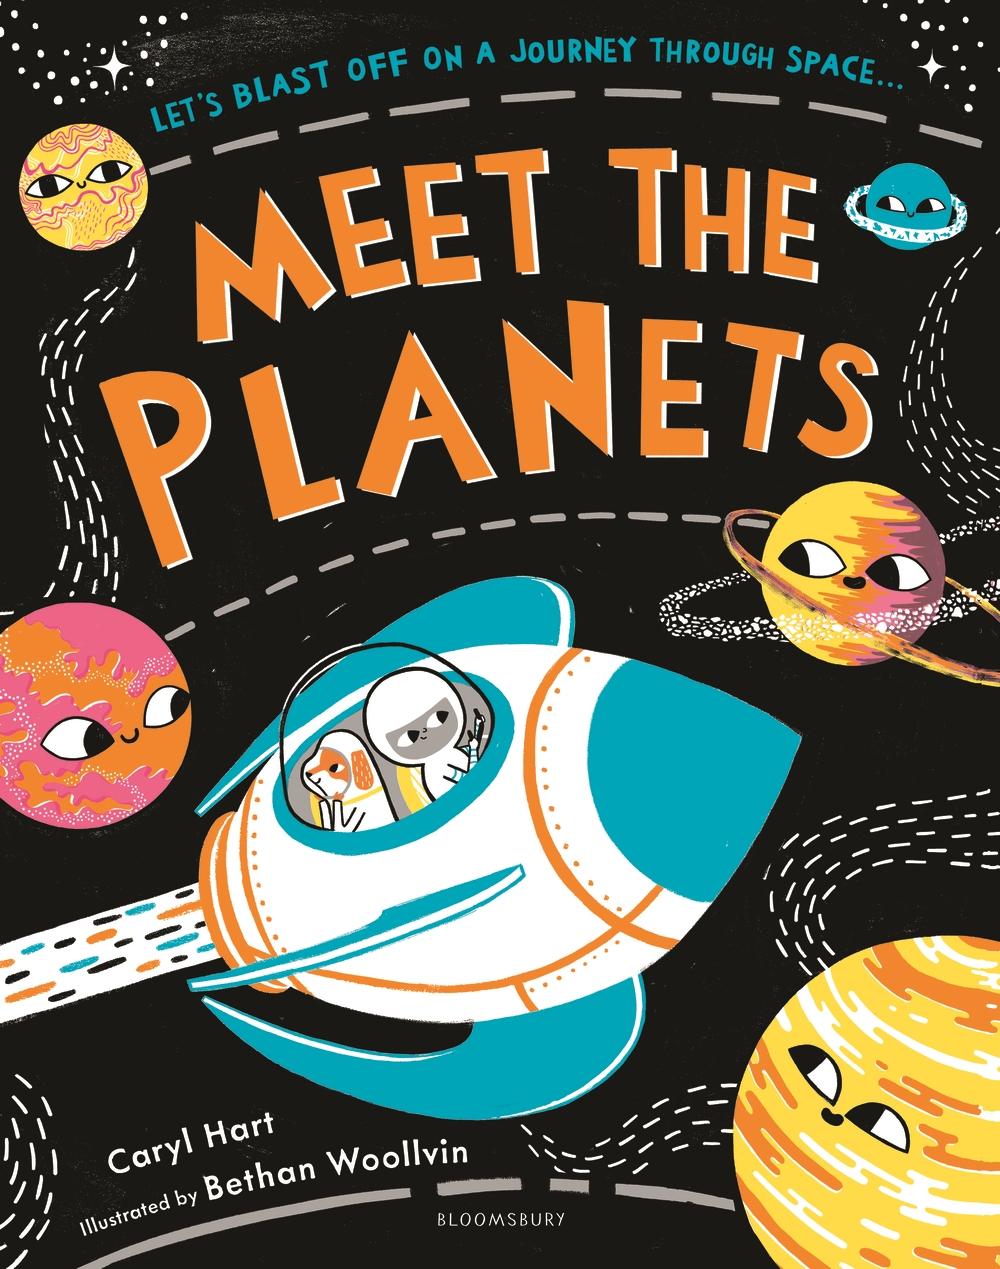 Meet the Planets - Caryl Hart